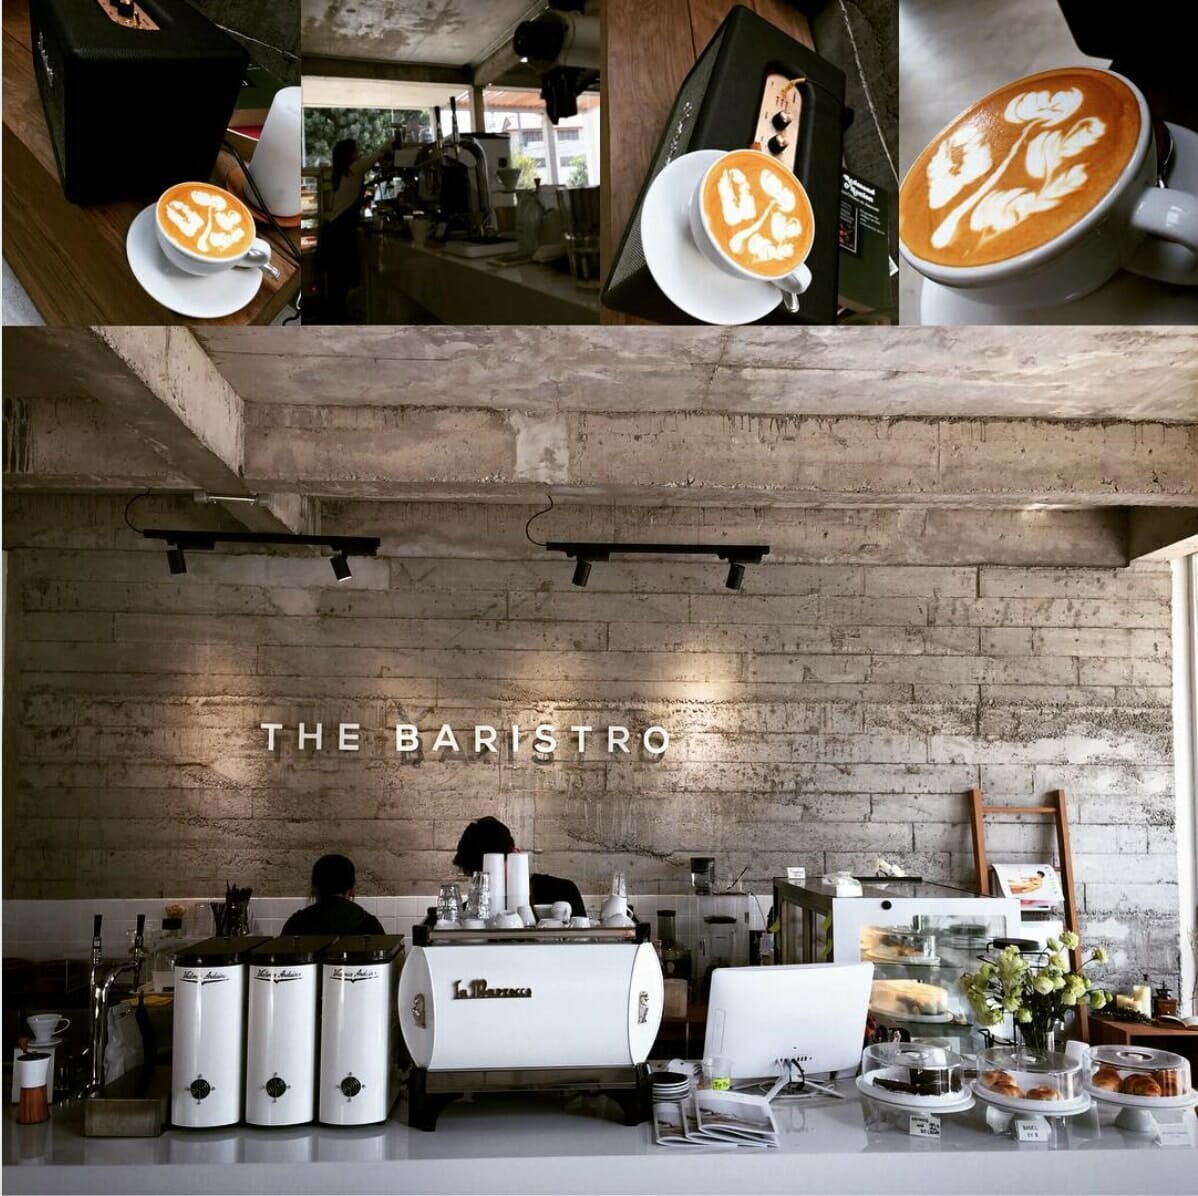 The Baristro on the Ping